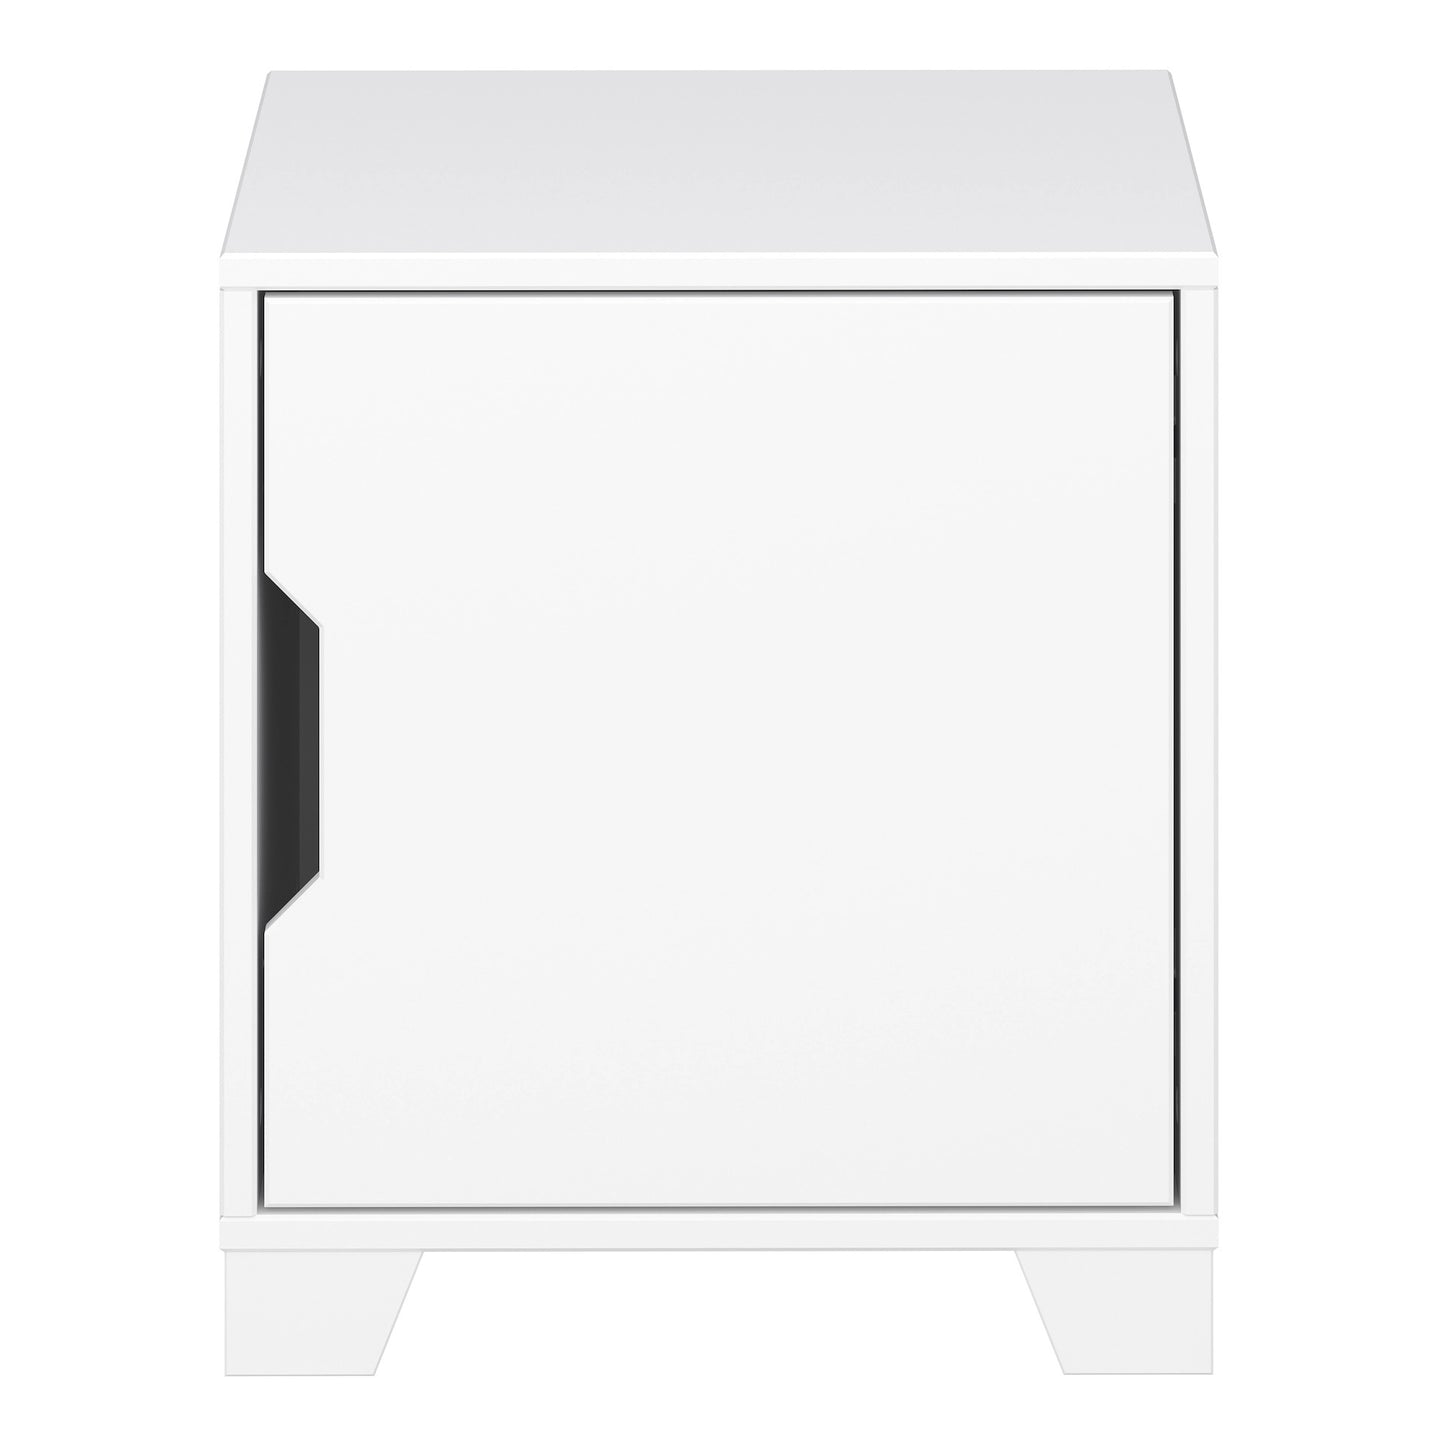 Furniture To Go Loke Bedside Table 1 Door in Pure White